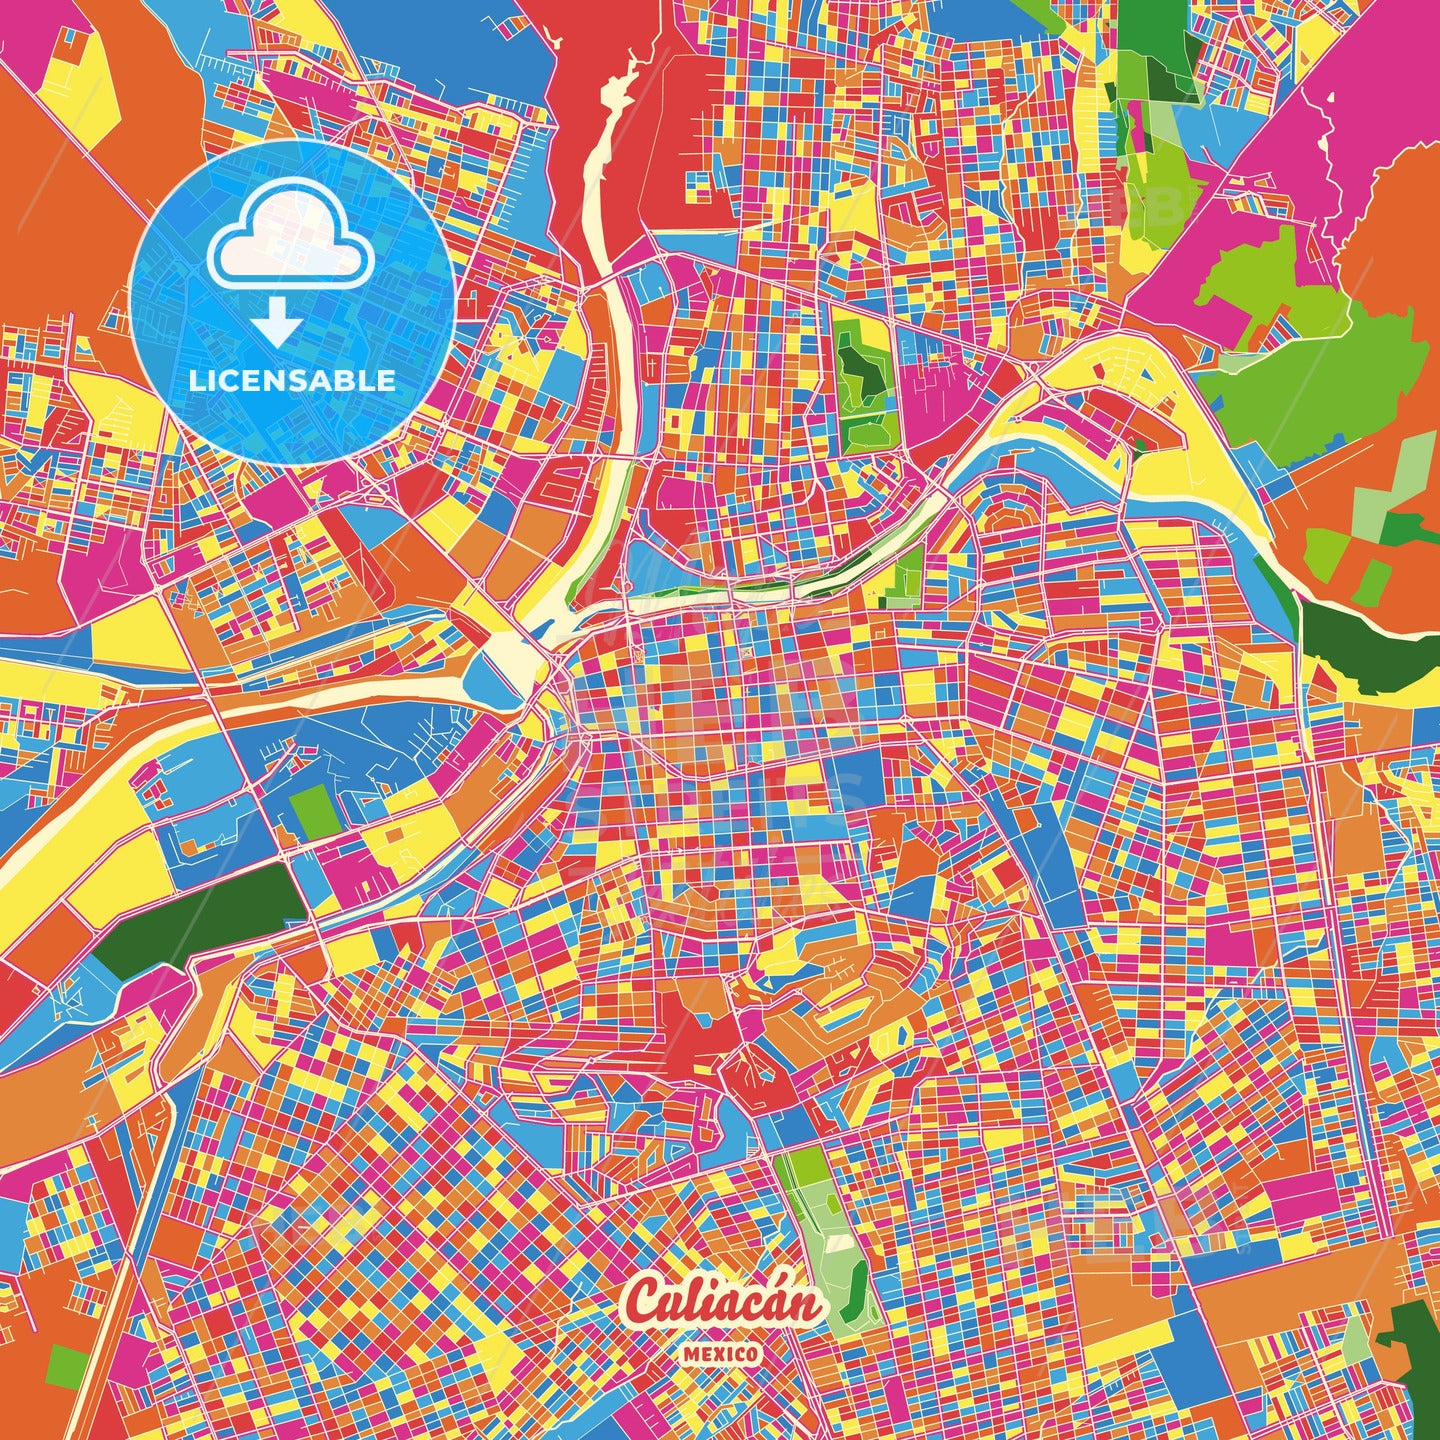 Culiacán, Mexico Crazy Colorful Street Map Poster Template - HEBSTREITS Sketches